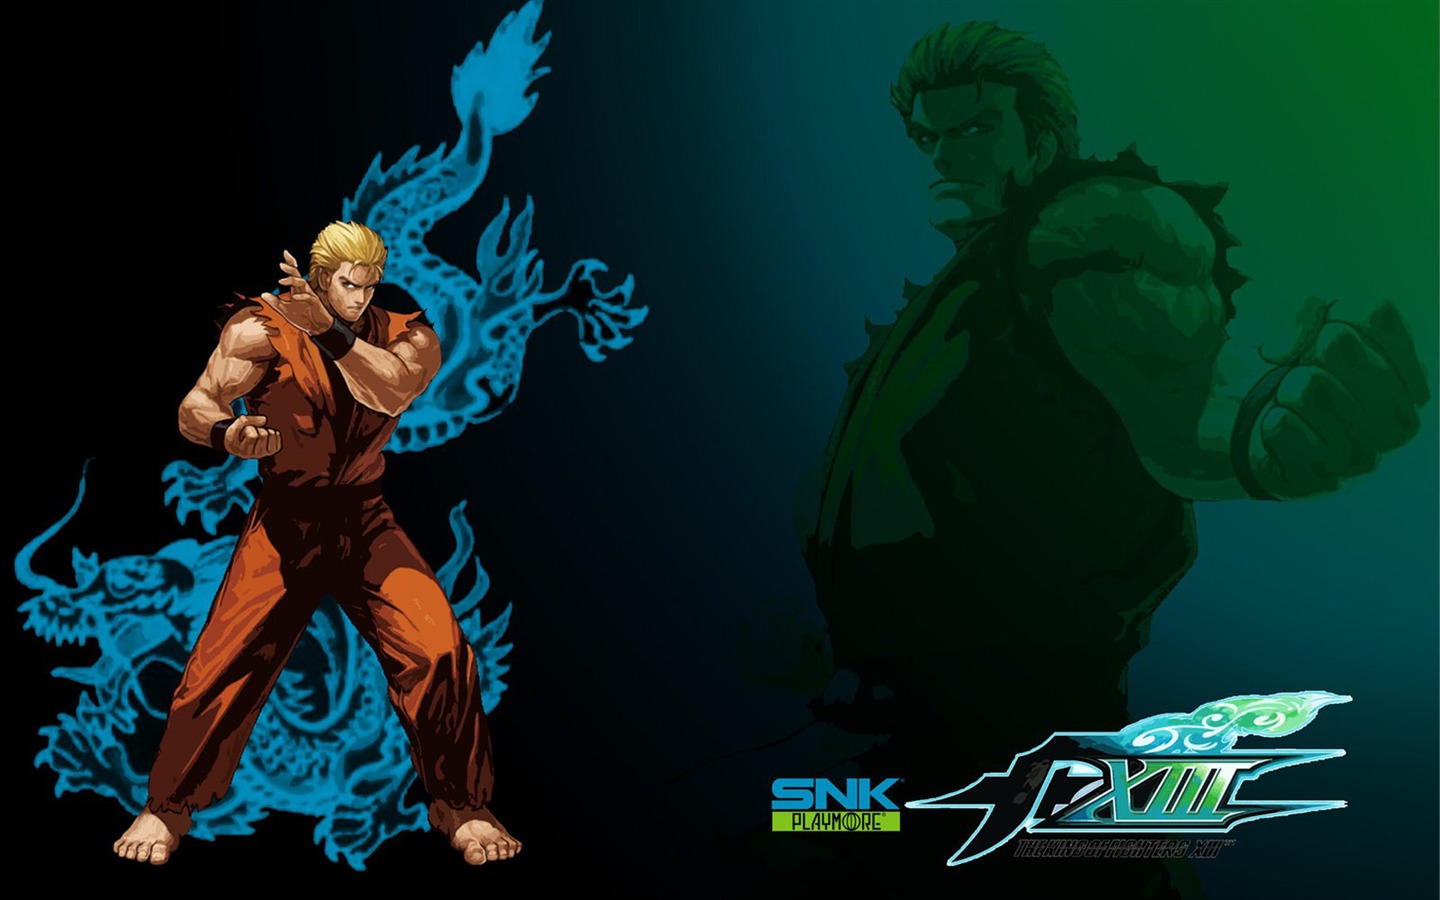 The King of Fighters XIII wallpapers #2 - 1440x900